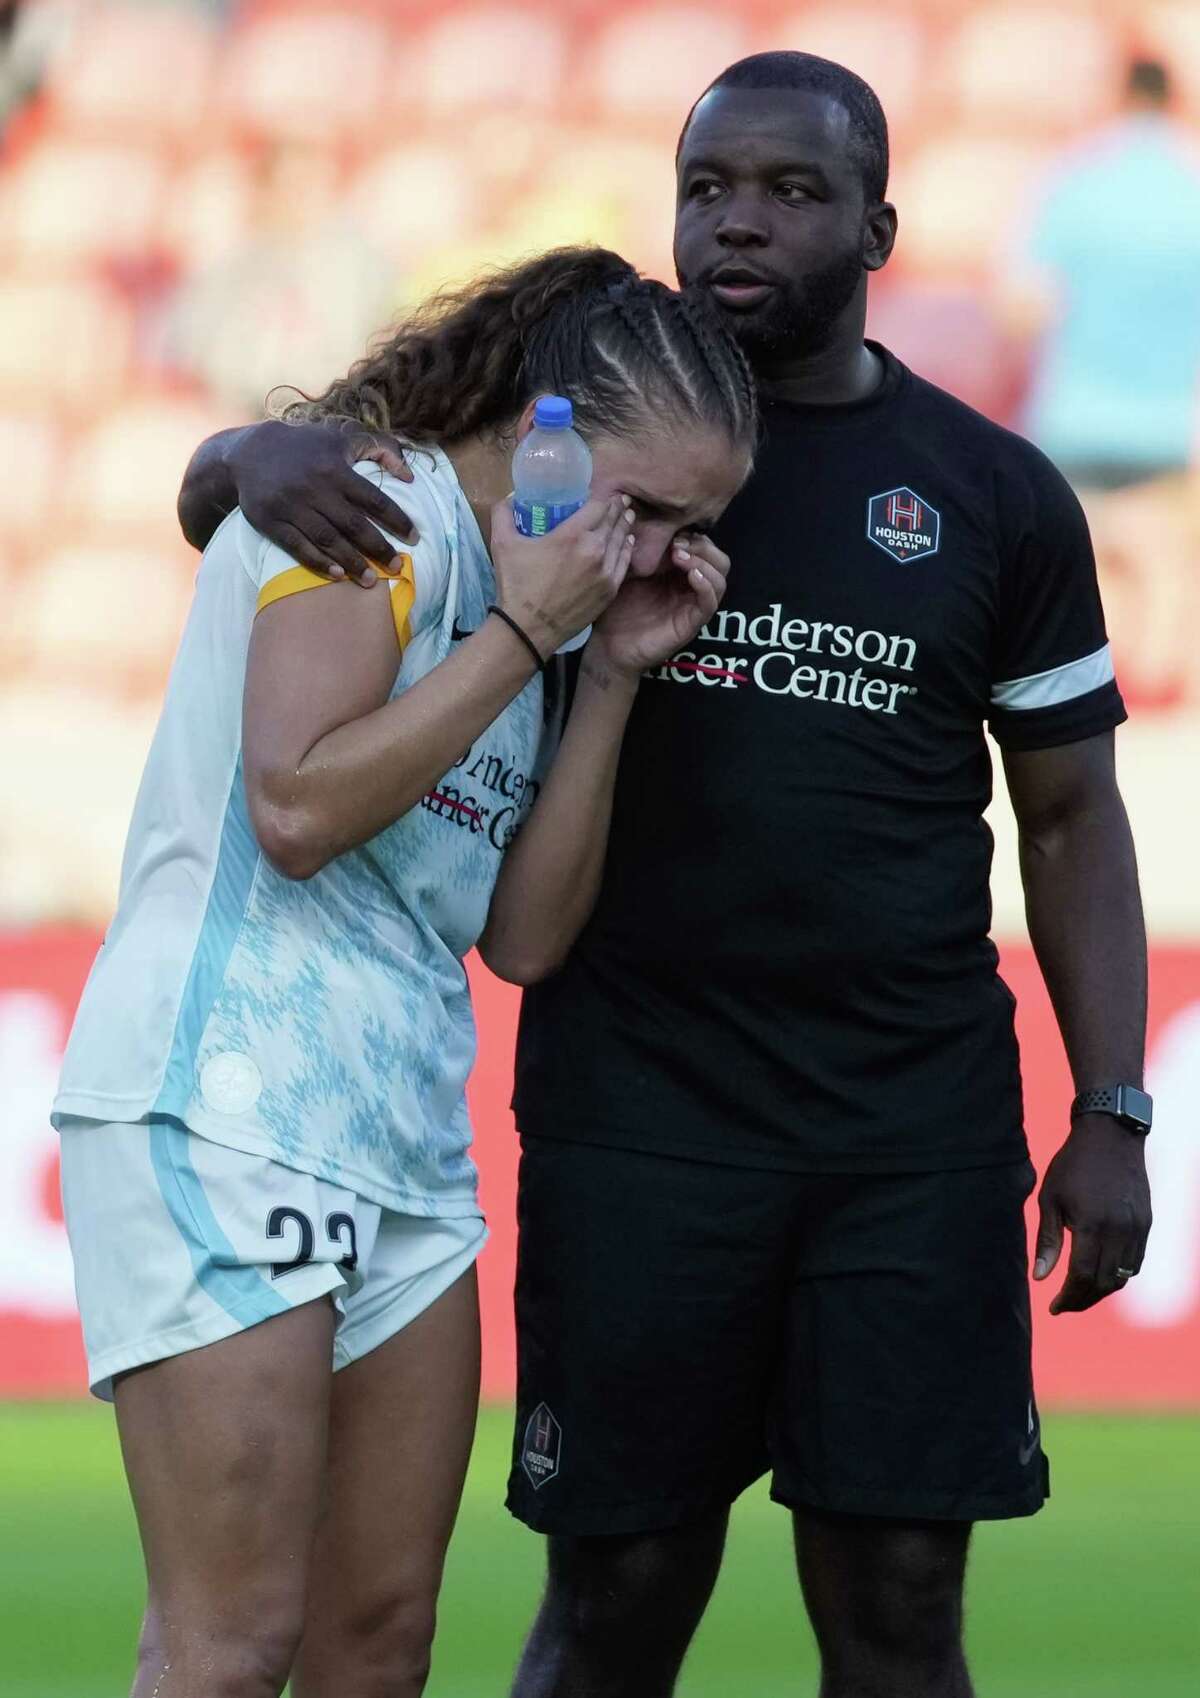 Houston Dash defender Ally Prisock (23) is emotional after losing the National Women's Soccer League quarter final playoff match to Kansas City Current Sunday, Oct. 16, 2022, at PNC Stadium in Houston. Kansas City Current defeated Houston Dash 2-1 in stoppage time.